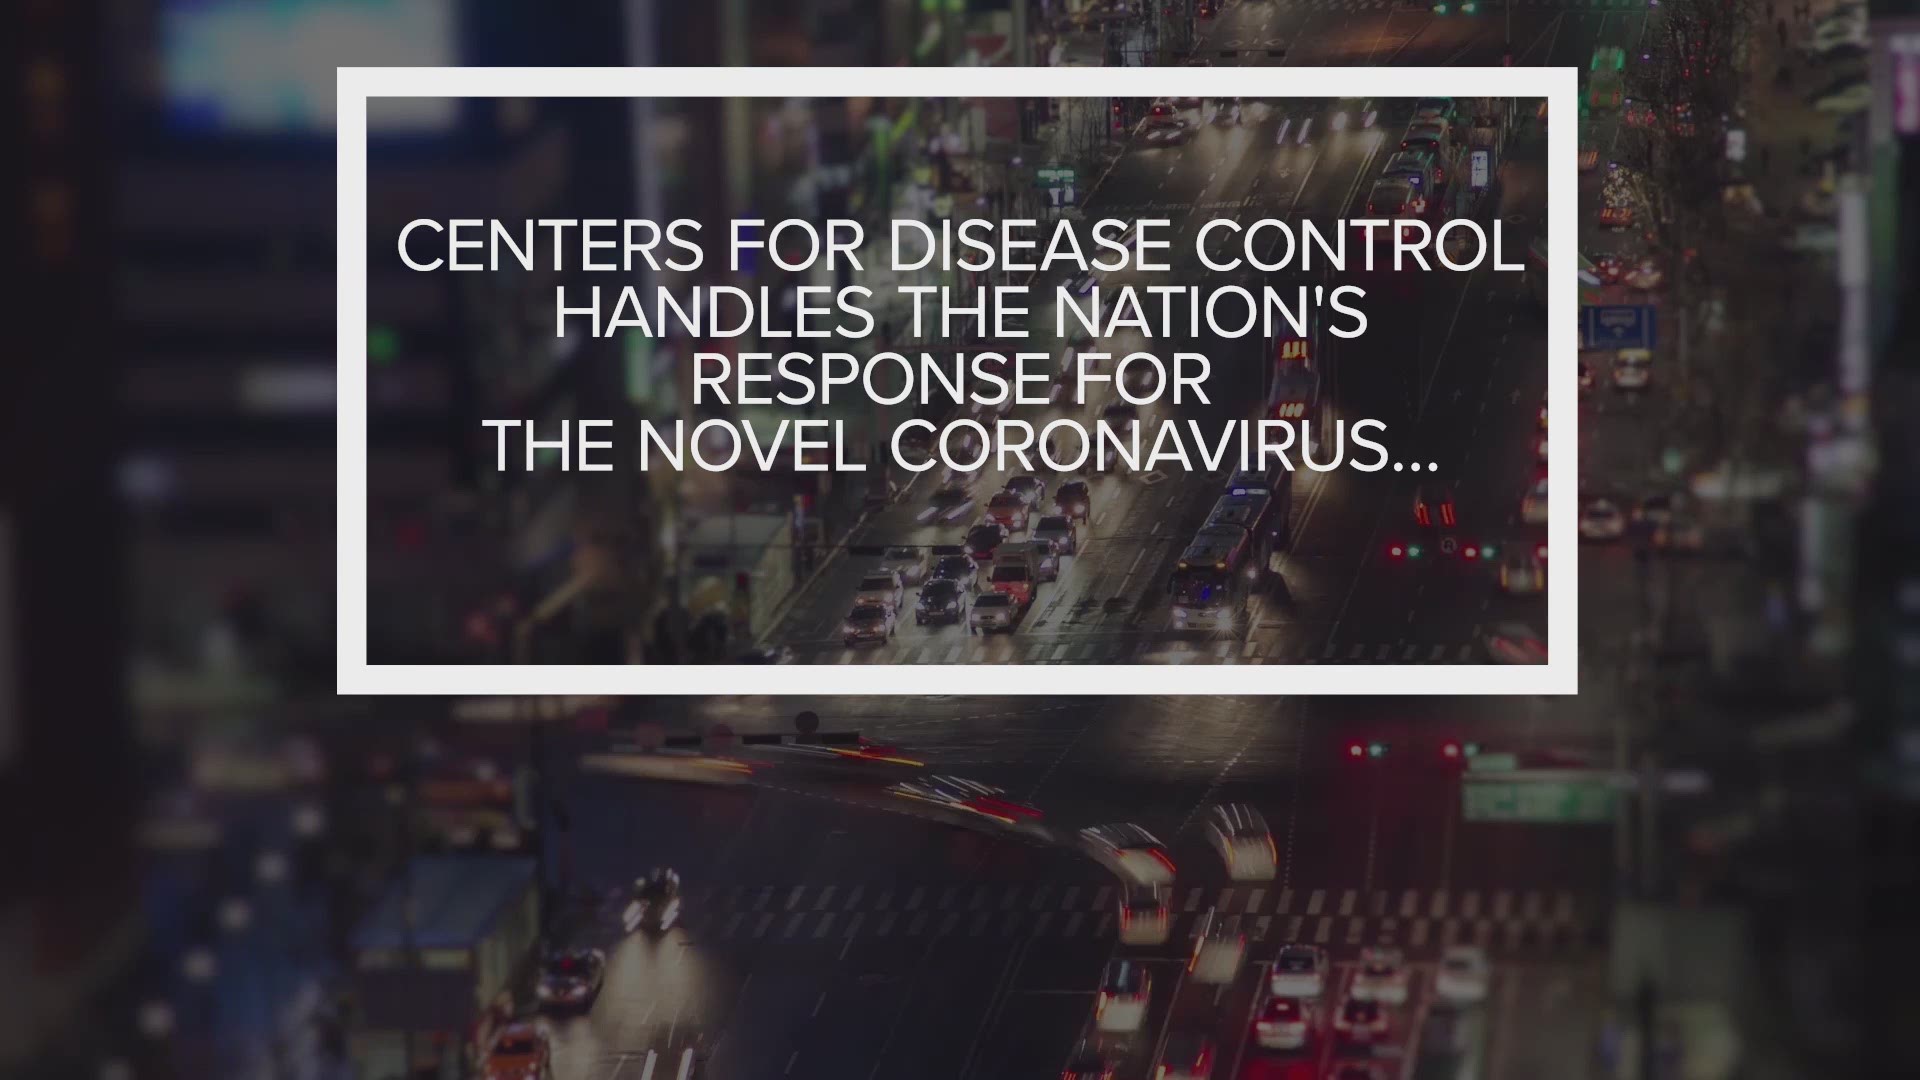 The U.S. Department of Defense is moving supplies and people in response to the coronavirus (COVID-19).